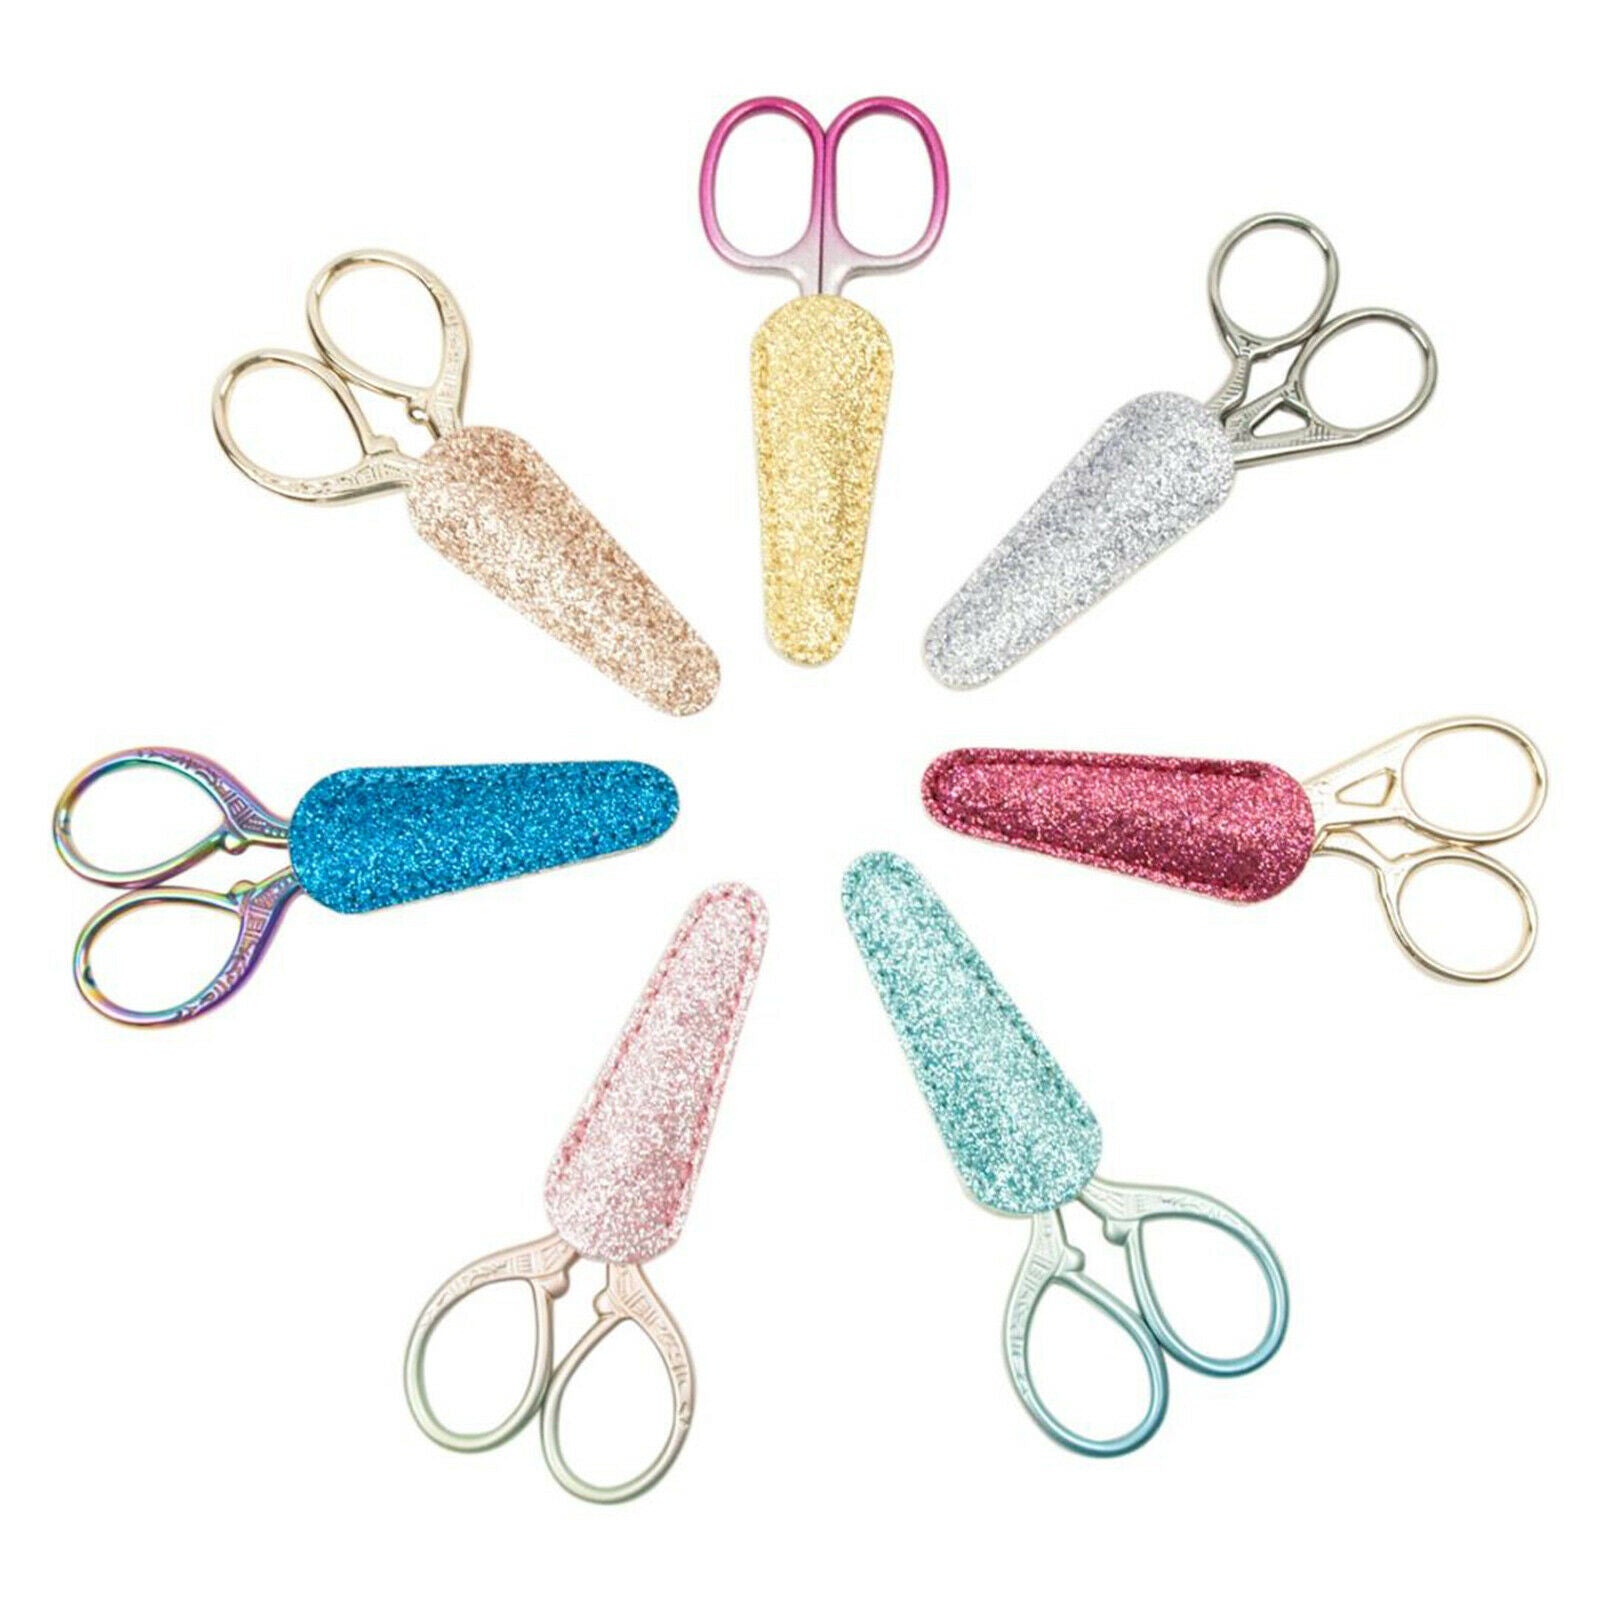 7Pcs Embroidery Scissors Sheath Sewing Shears Protector Cover Bags Case